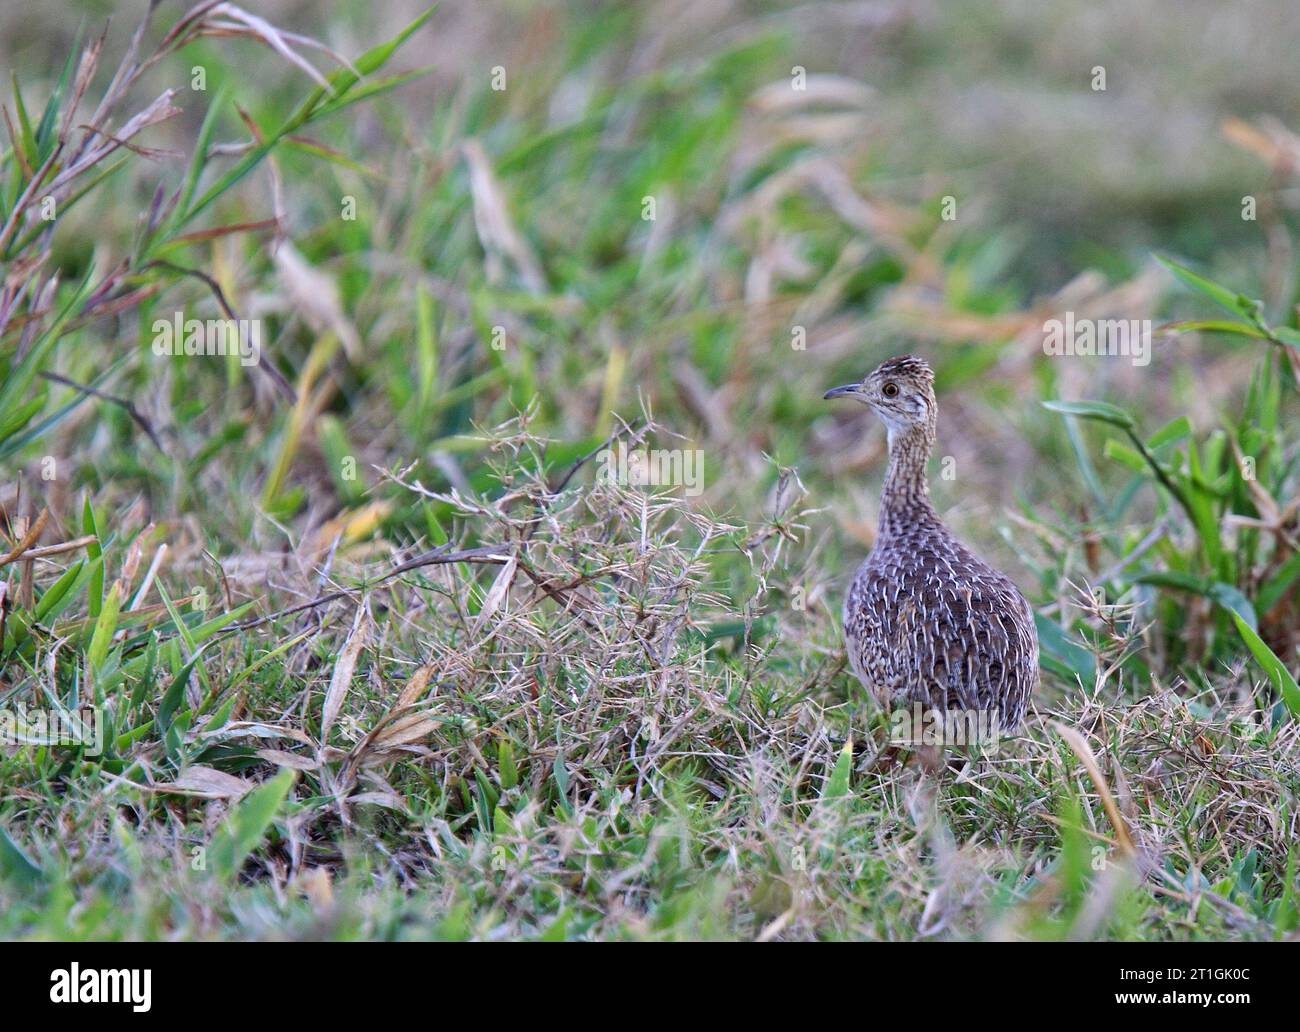 spotted nothura (Nothura maculosa), standing on the ground, Brazil Stock Photo